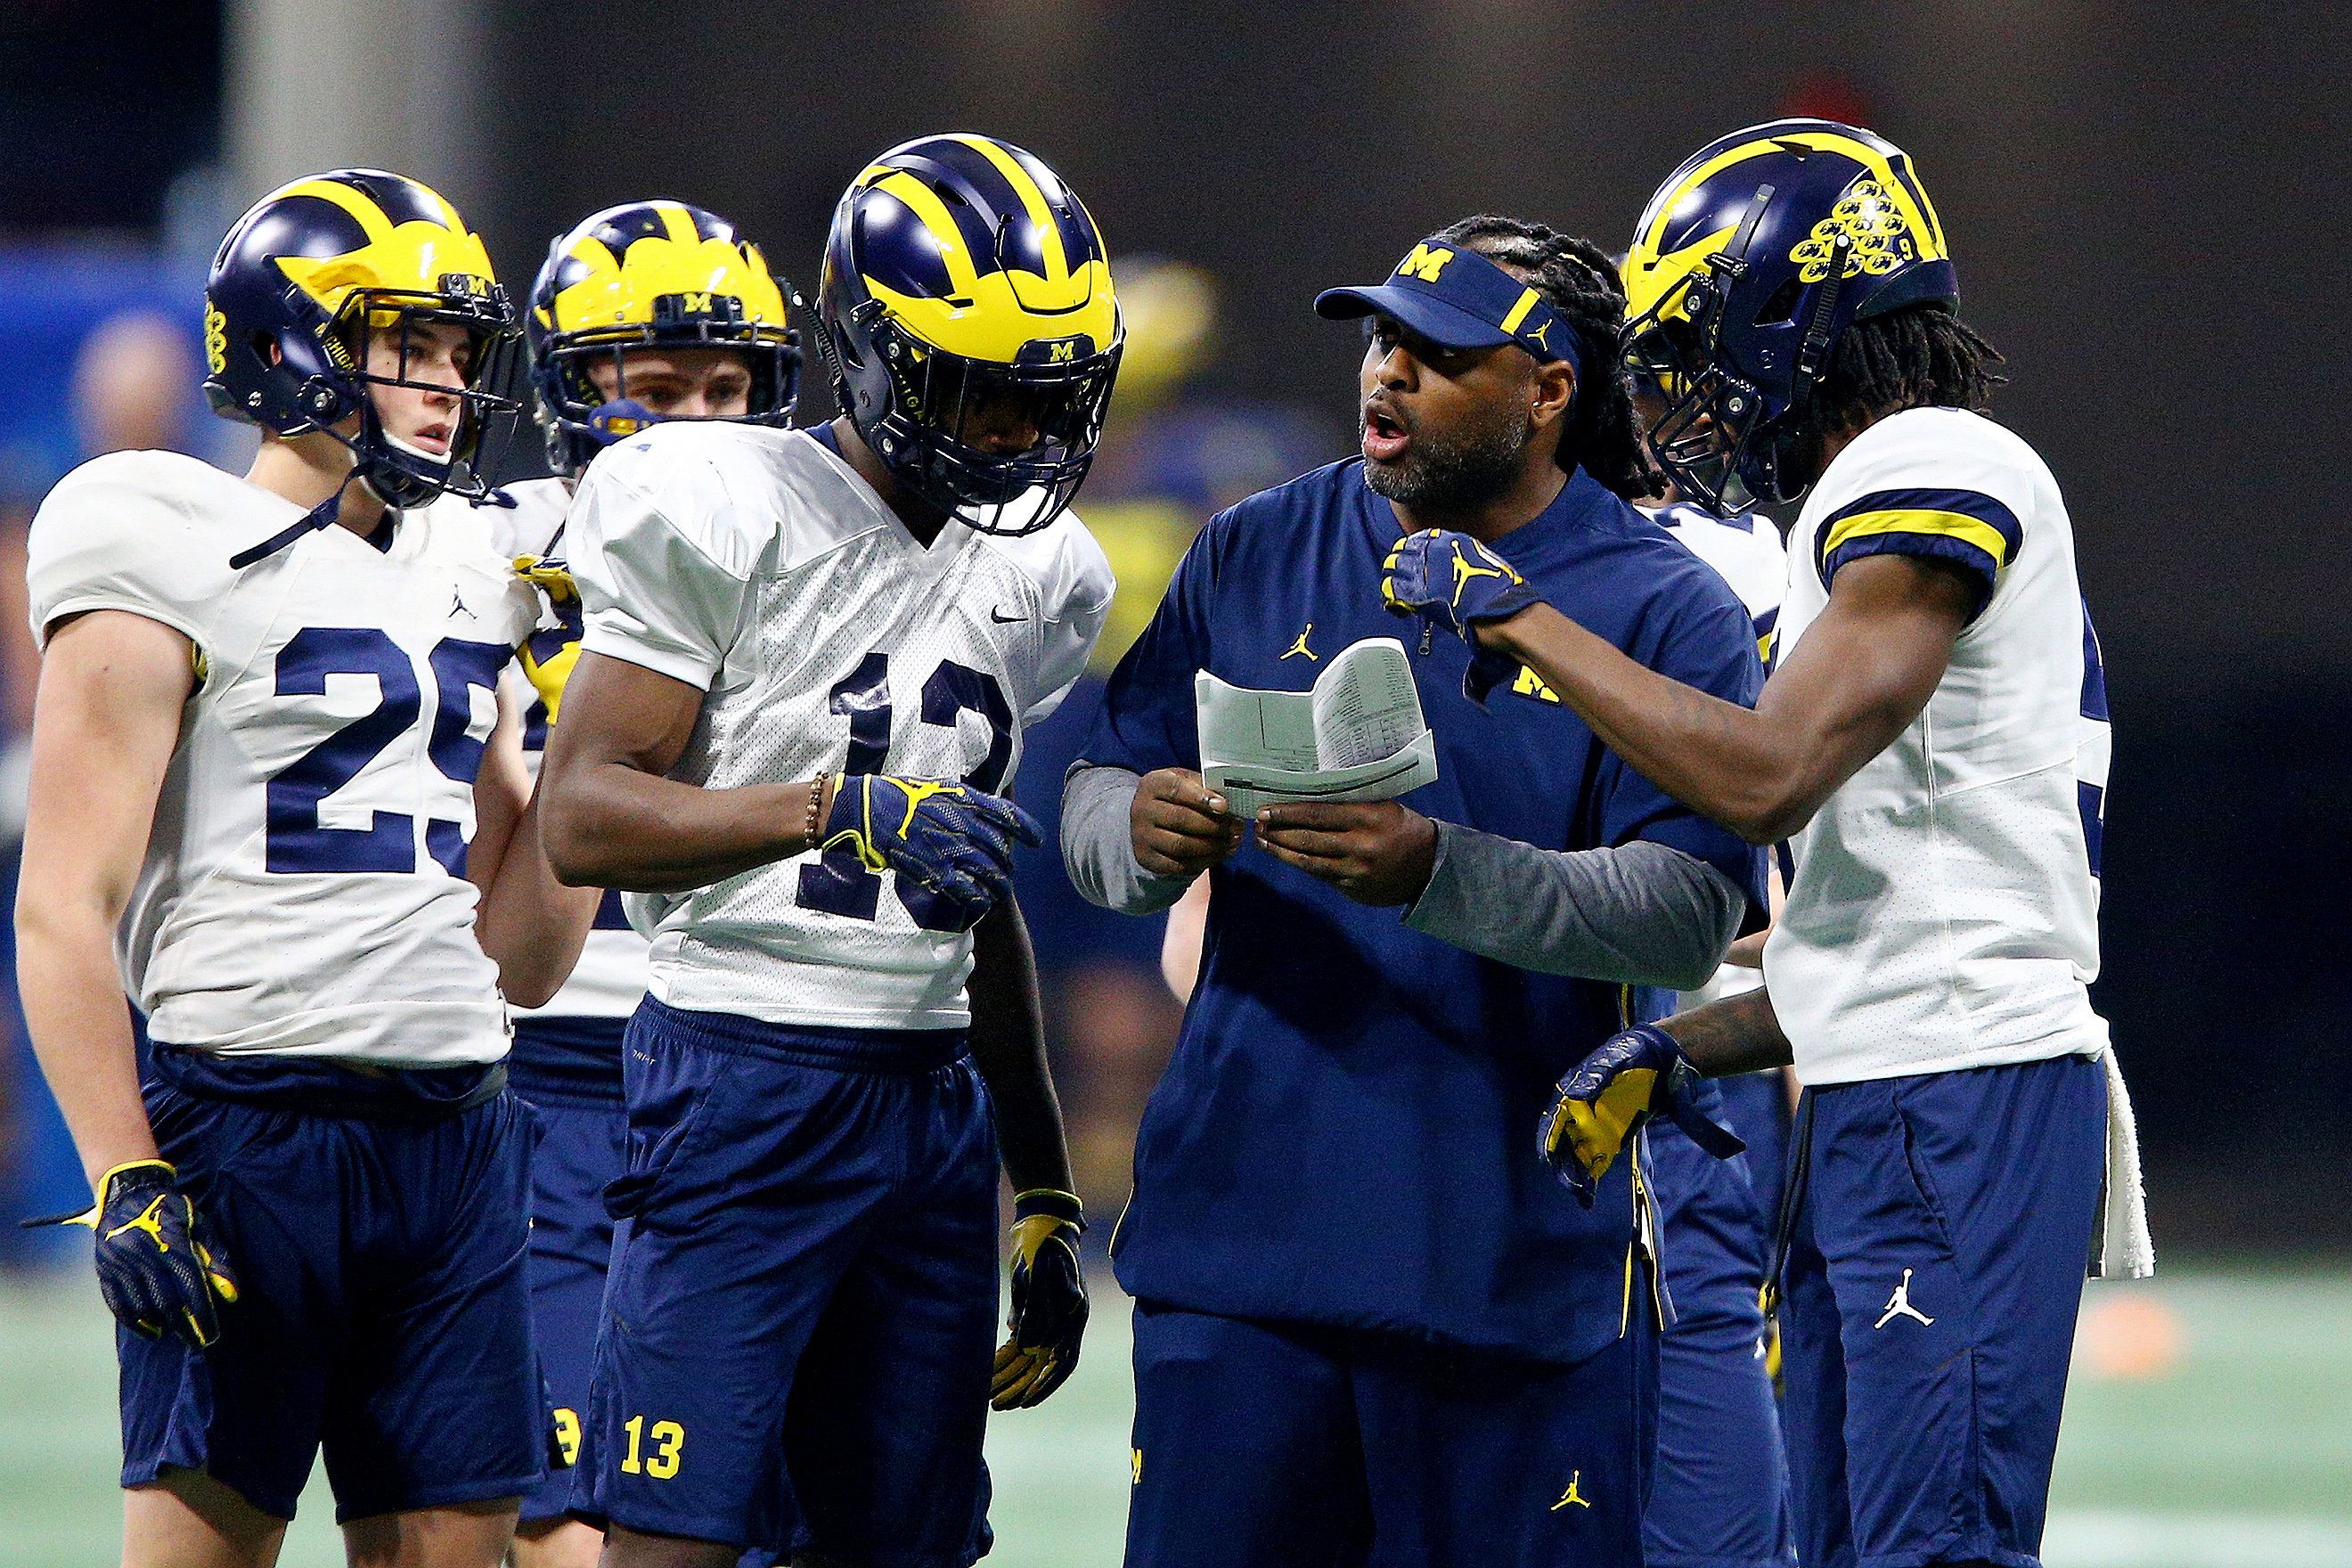 Devin Bush: 'I need hope' Harbaugh, Michigan can get over hump